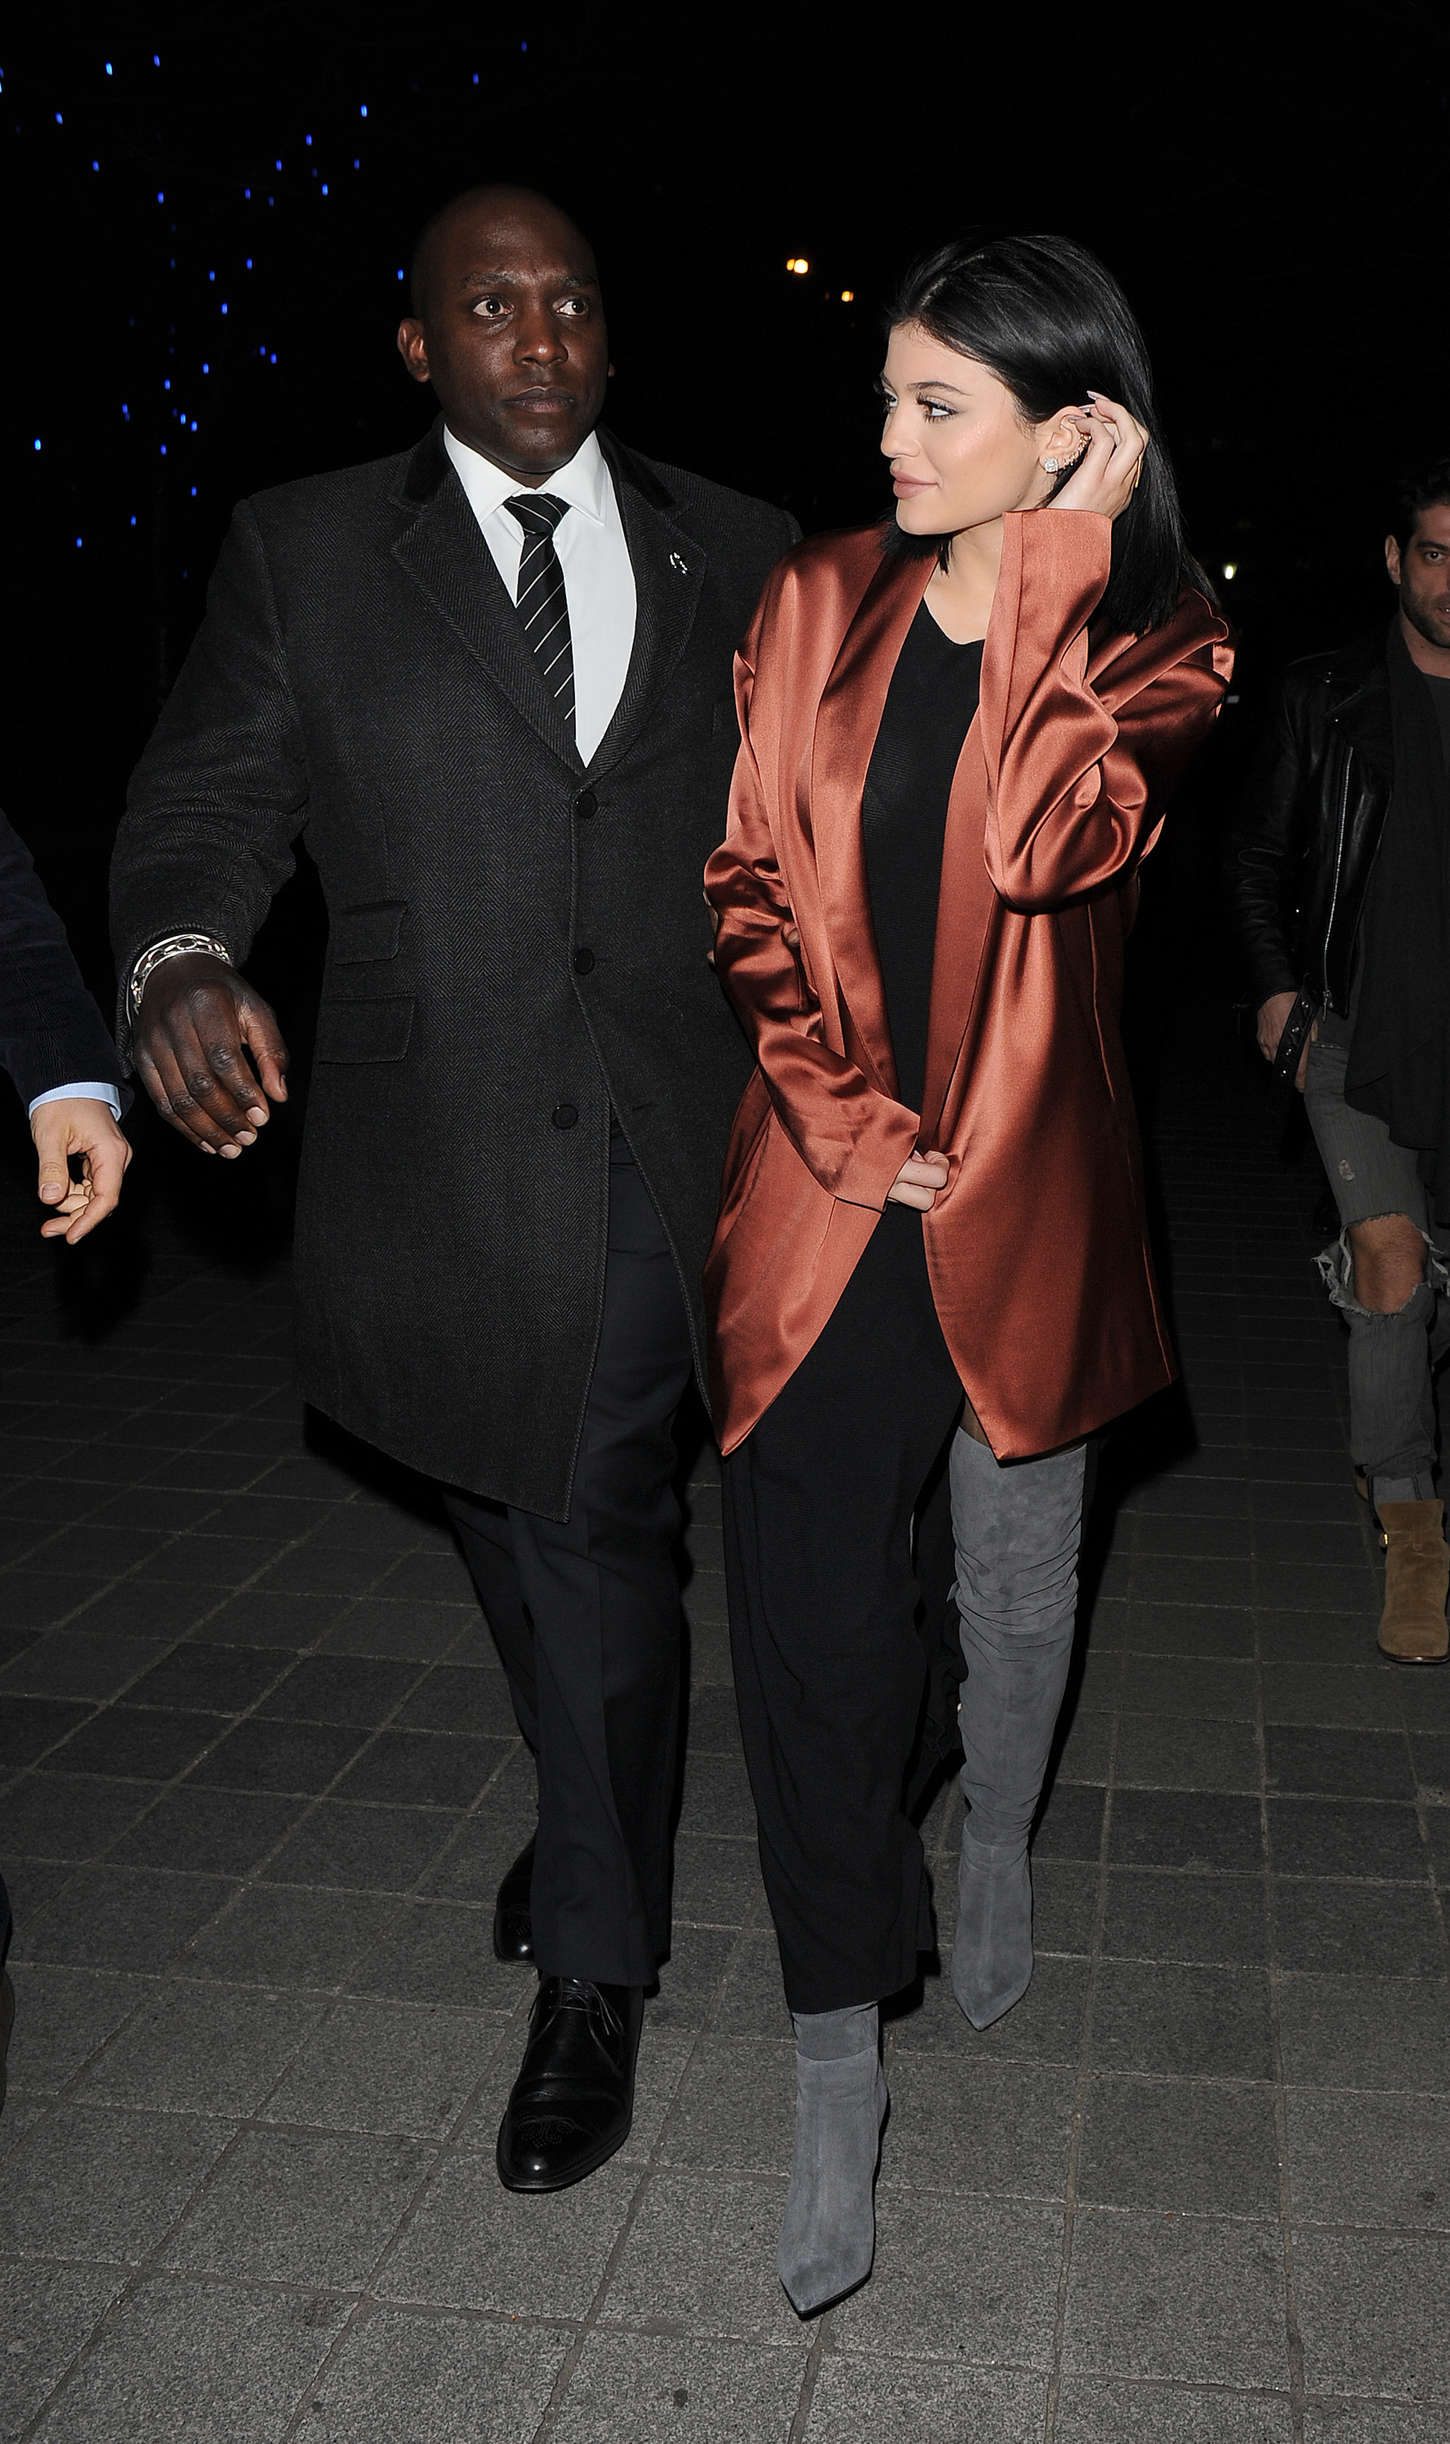 Kylie-Jenner-Night-Out-in-London--06.jpg